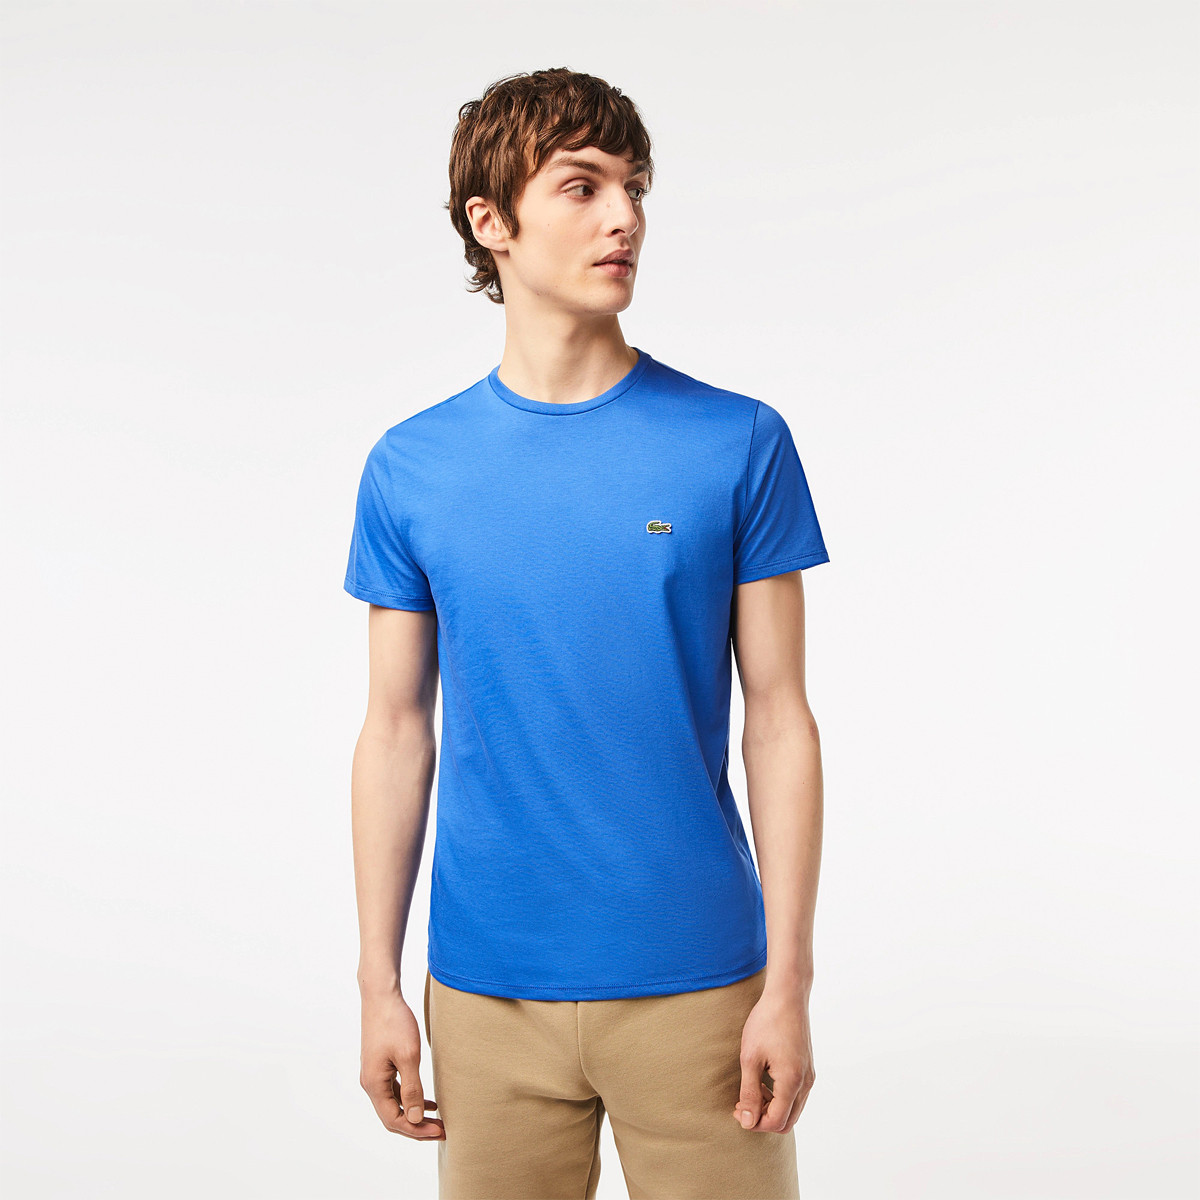 T-SHIRT LACOSTE TH2038